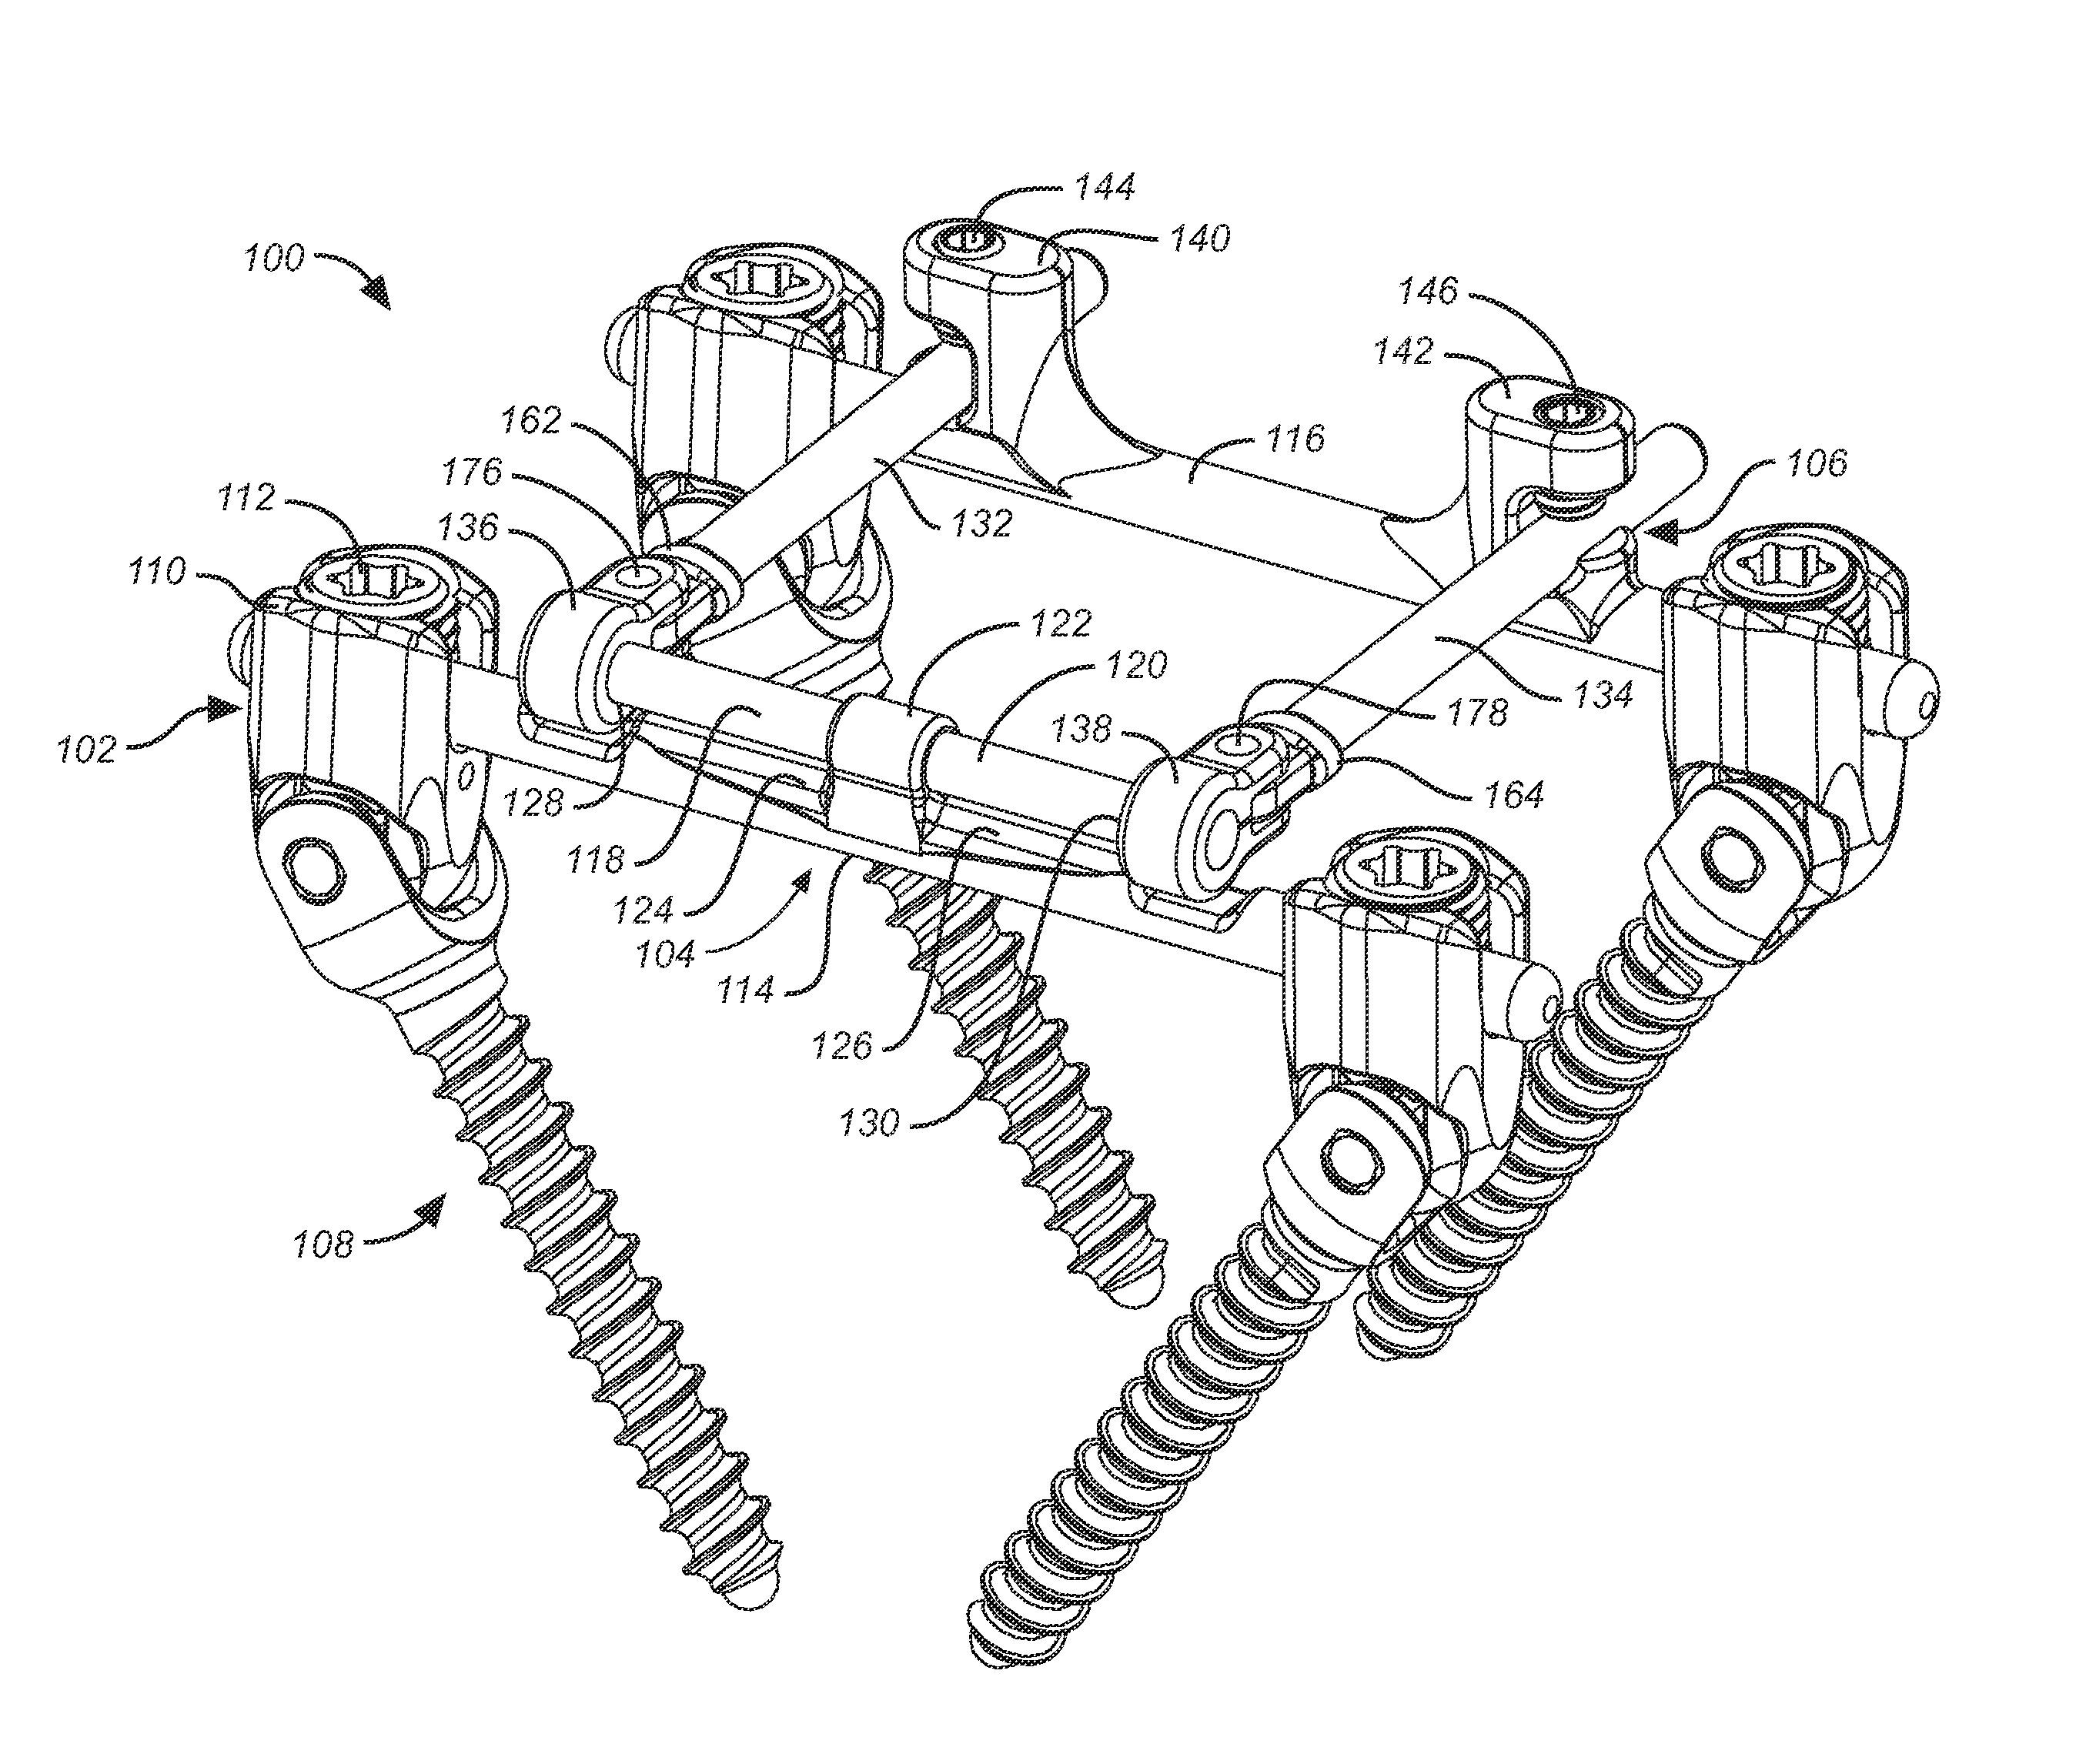 Rod capture mechanism for dynamic stabilization and motion preservation spinal implantation system and method